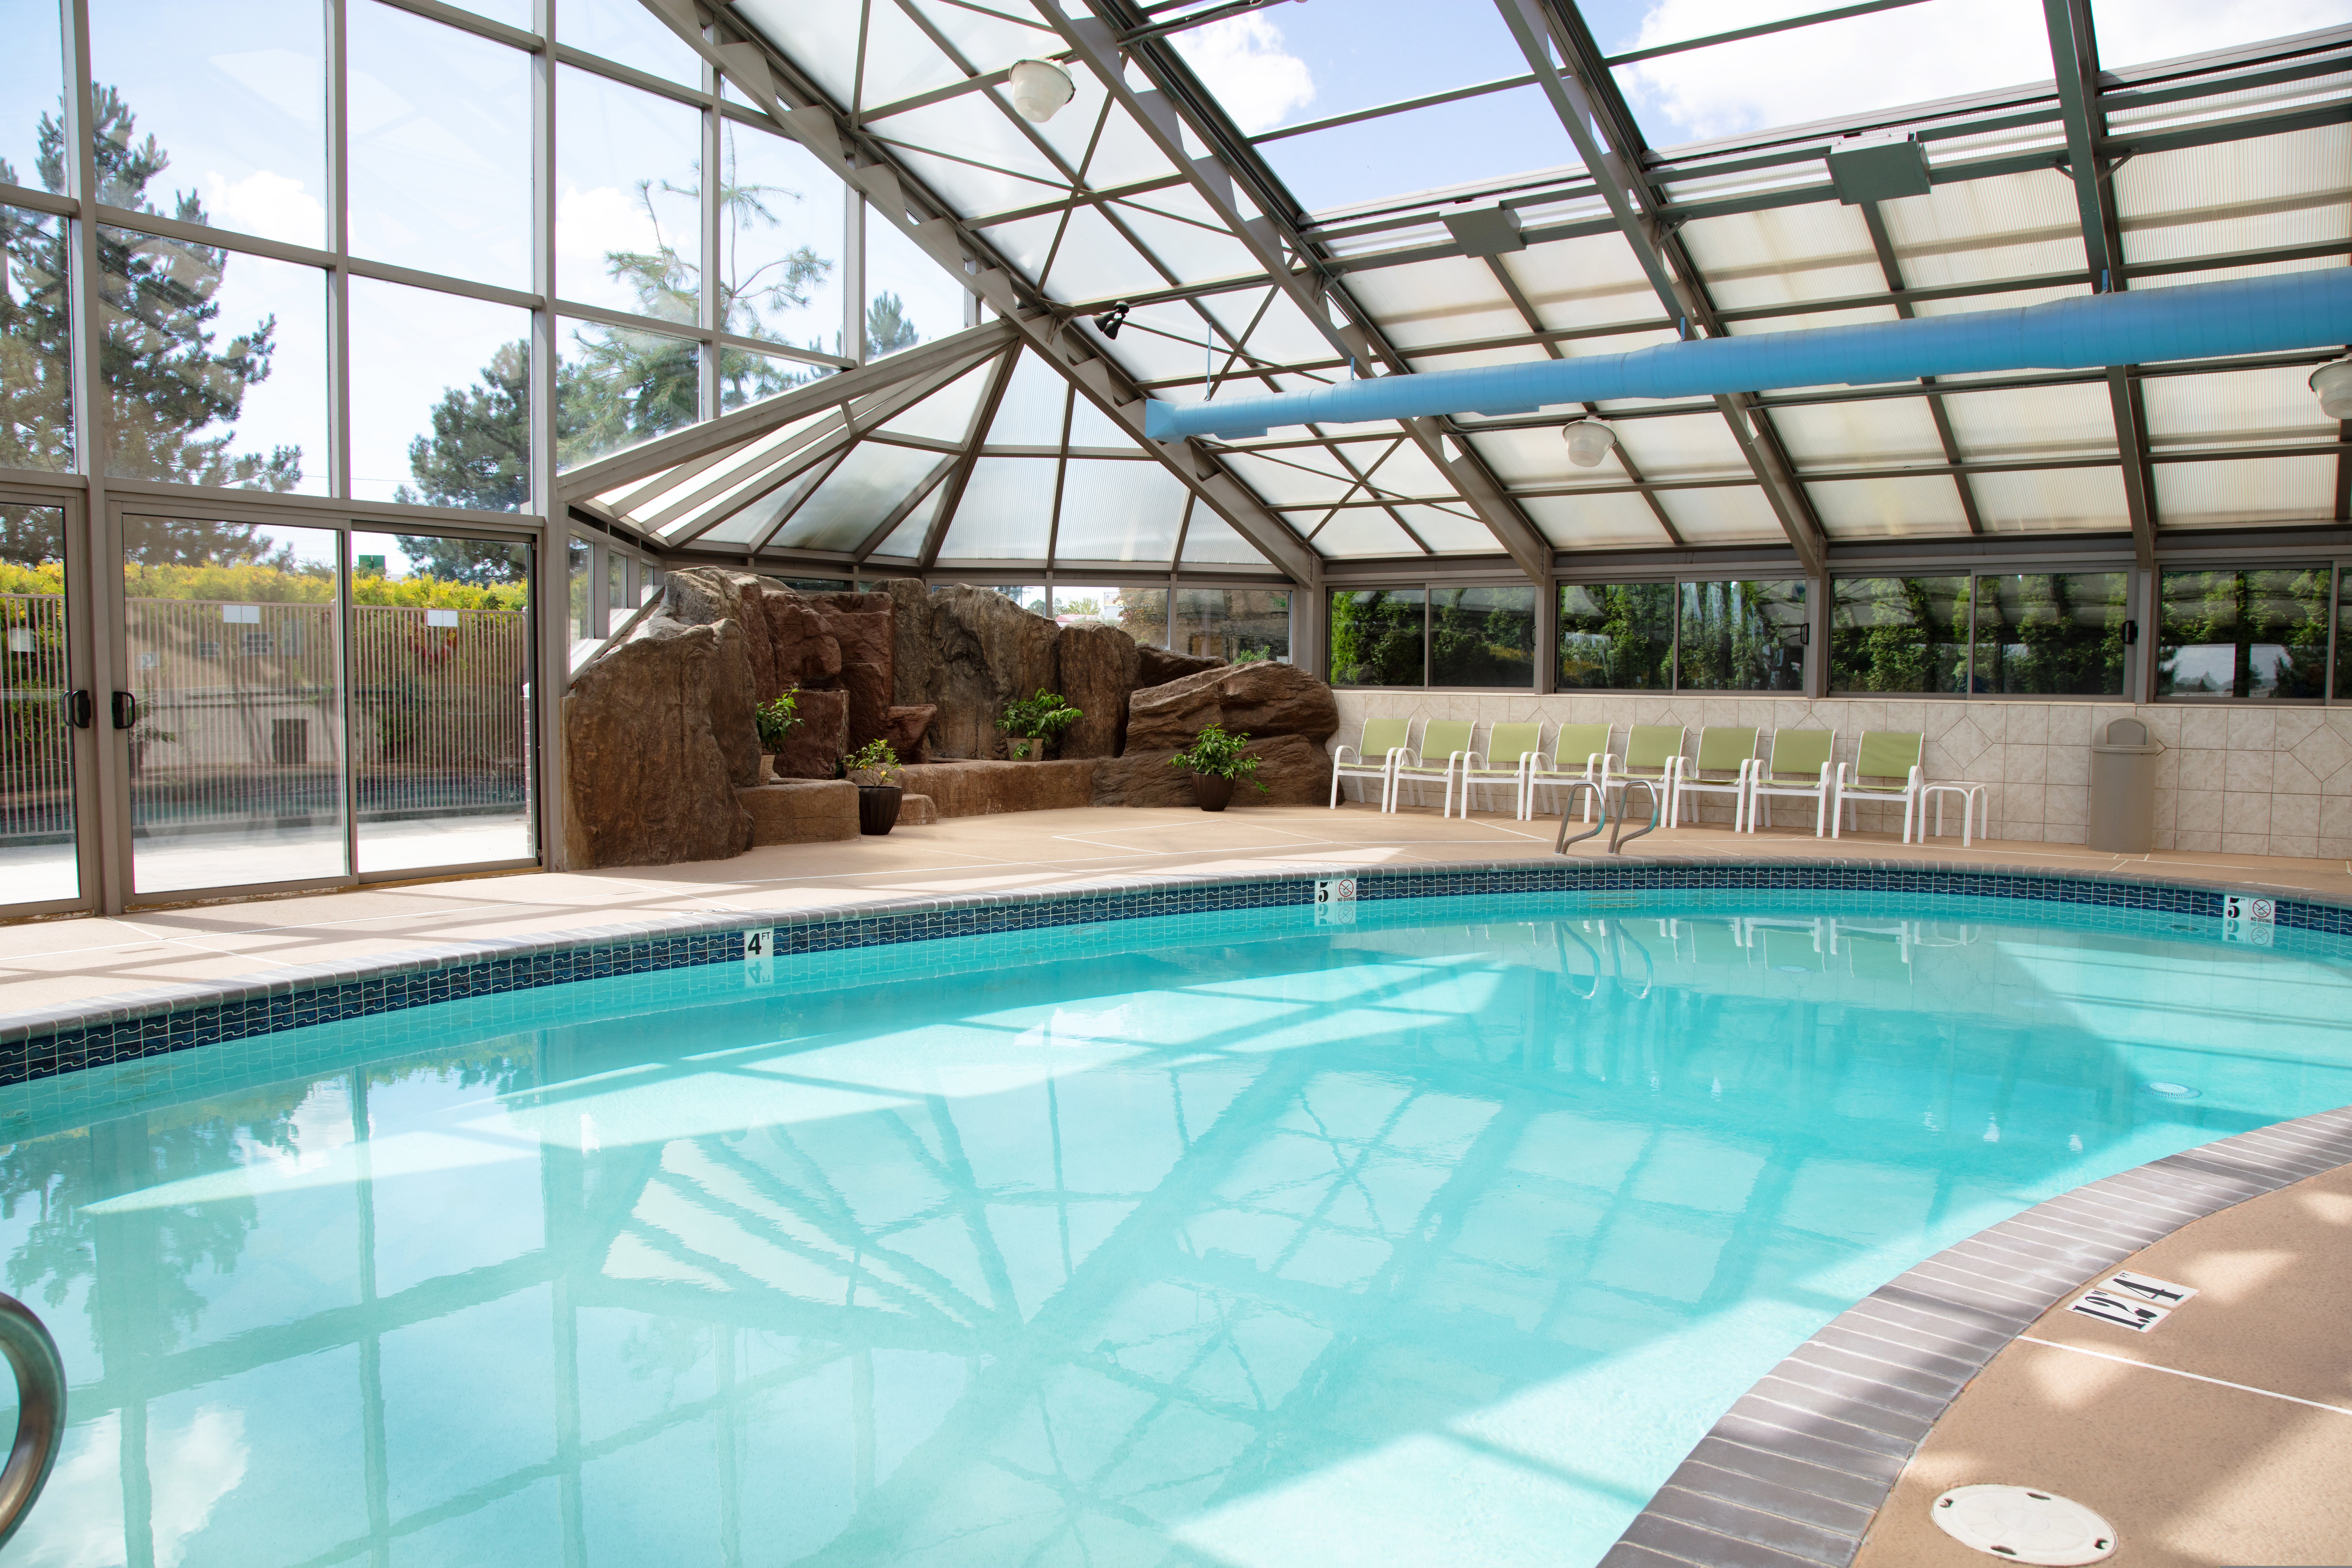 Take a refreshing dip in our indoor pool.